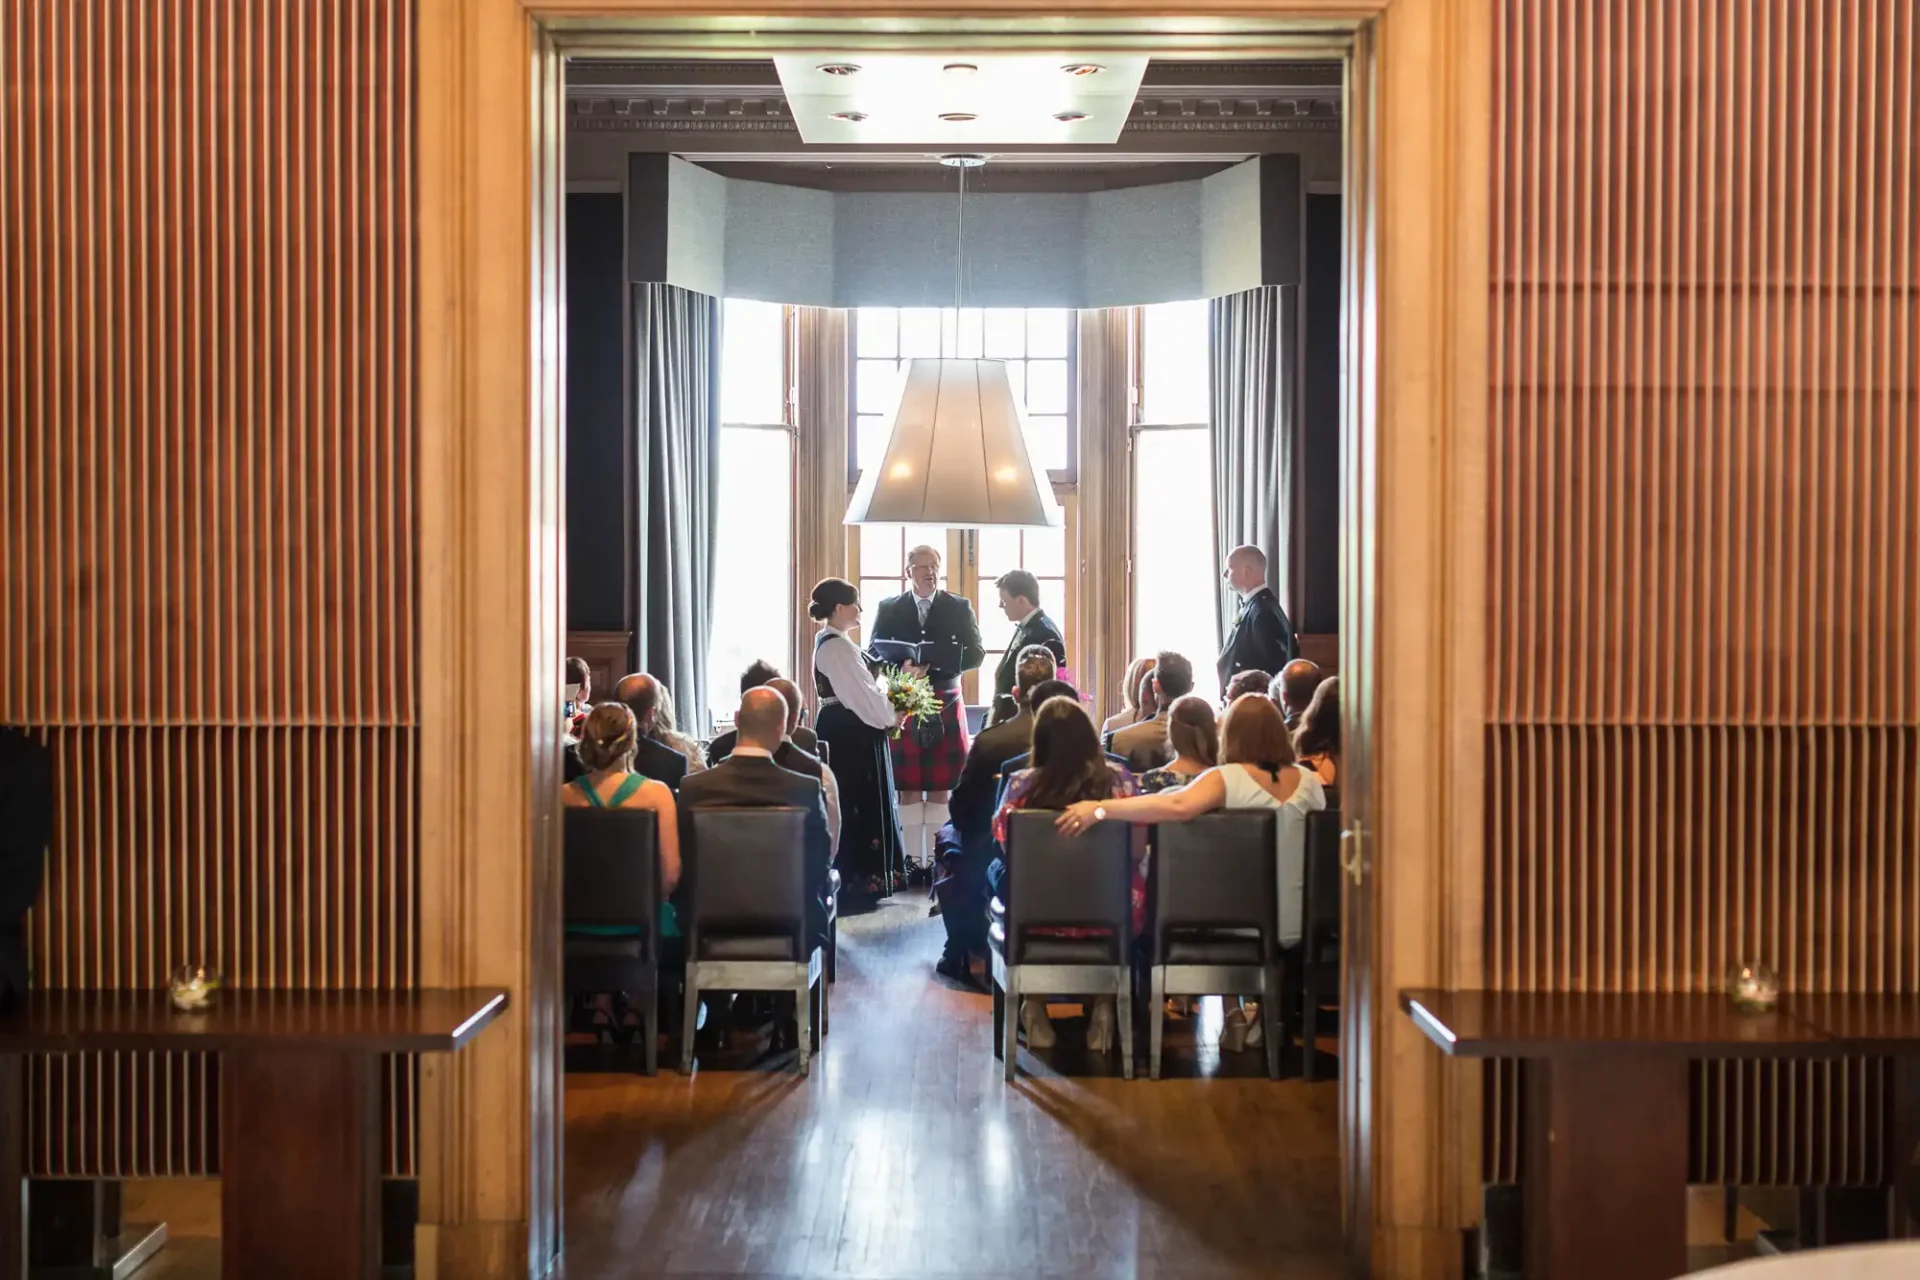 A wedding ceremony in a wood-paneled hall with guests seated as the couple stands before the officiant.